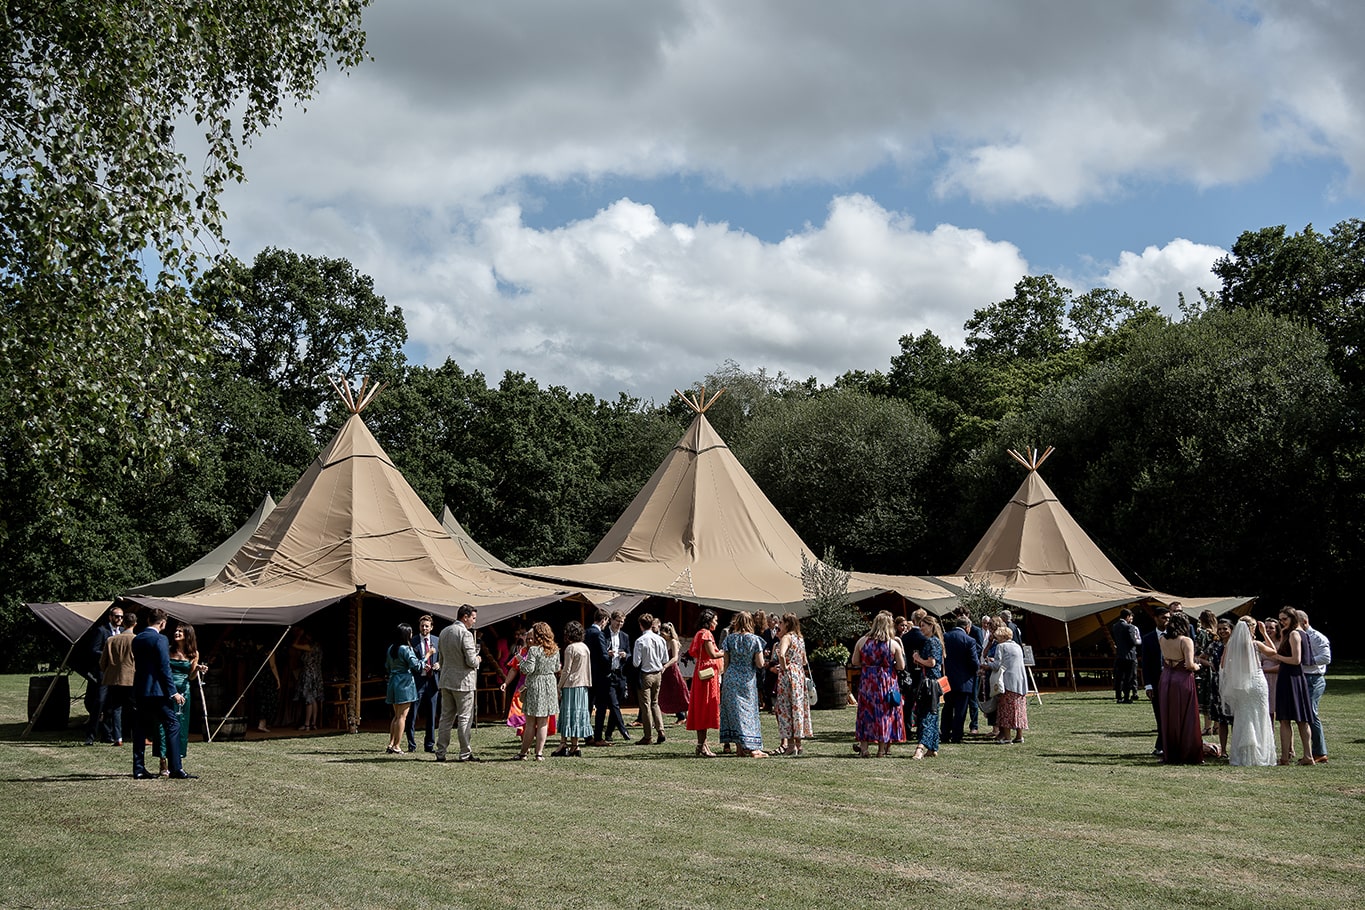 Huge wedding tipi tent set in garden grounds with guests mingling